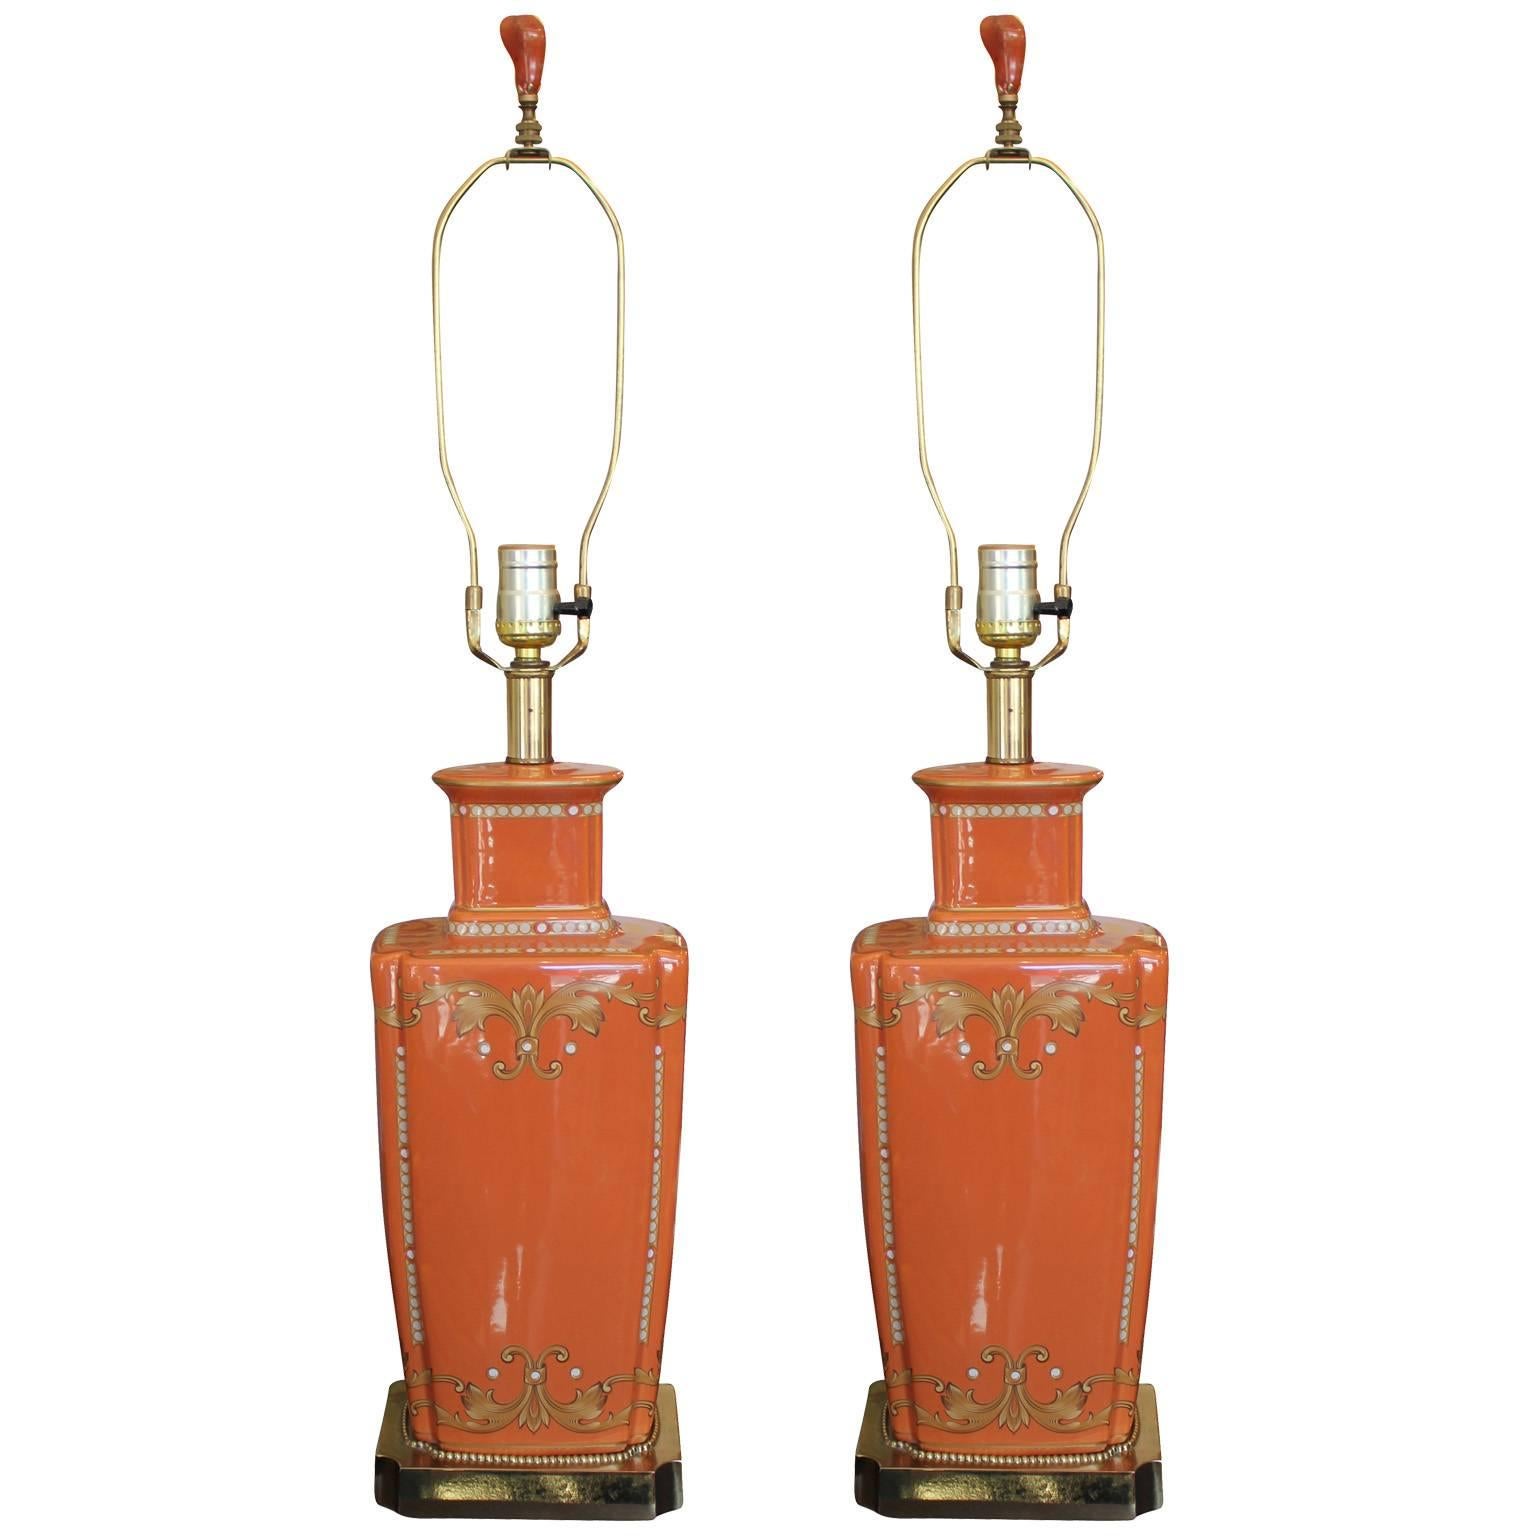 Pair of Vintage Orange Lamps with Shiny Brass and Amber Accents